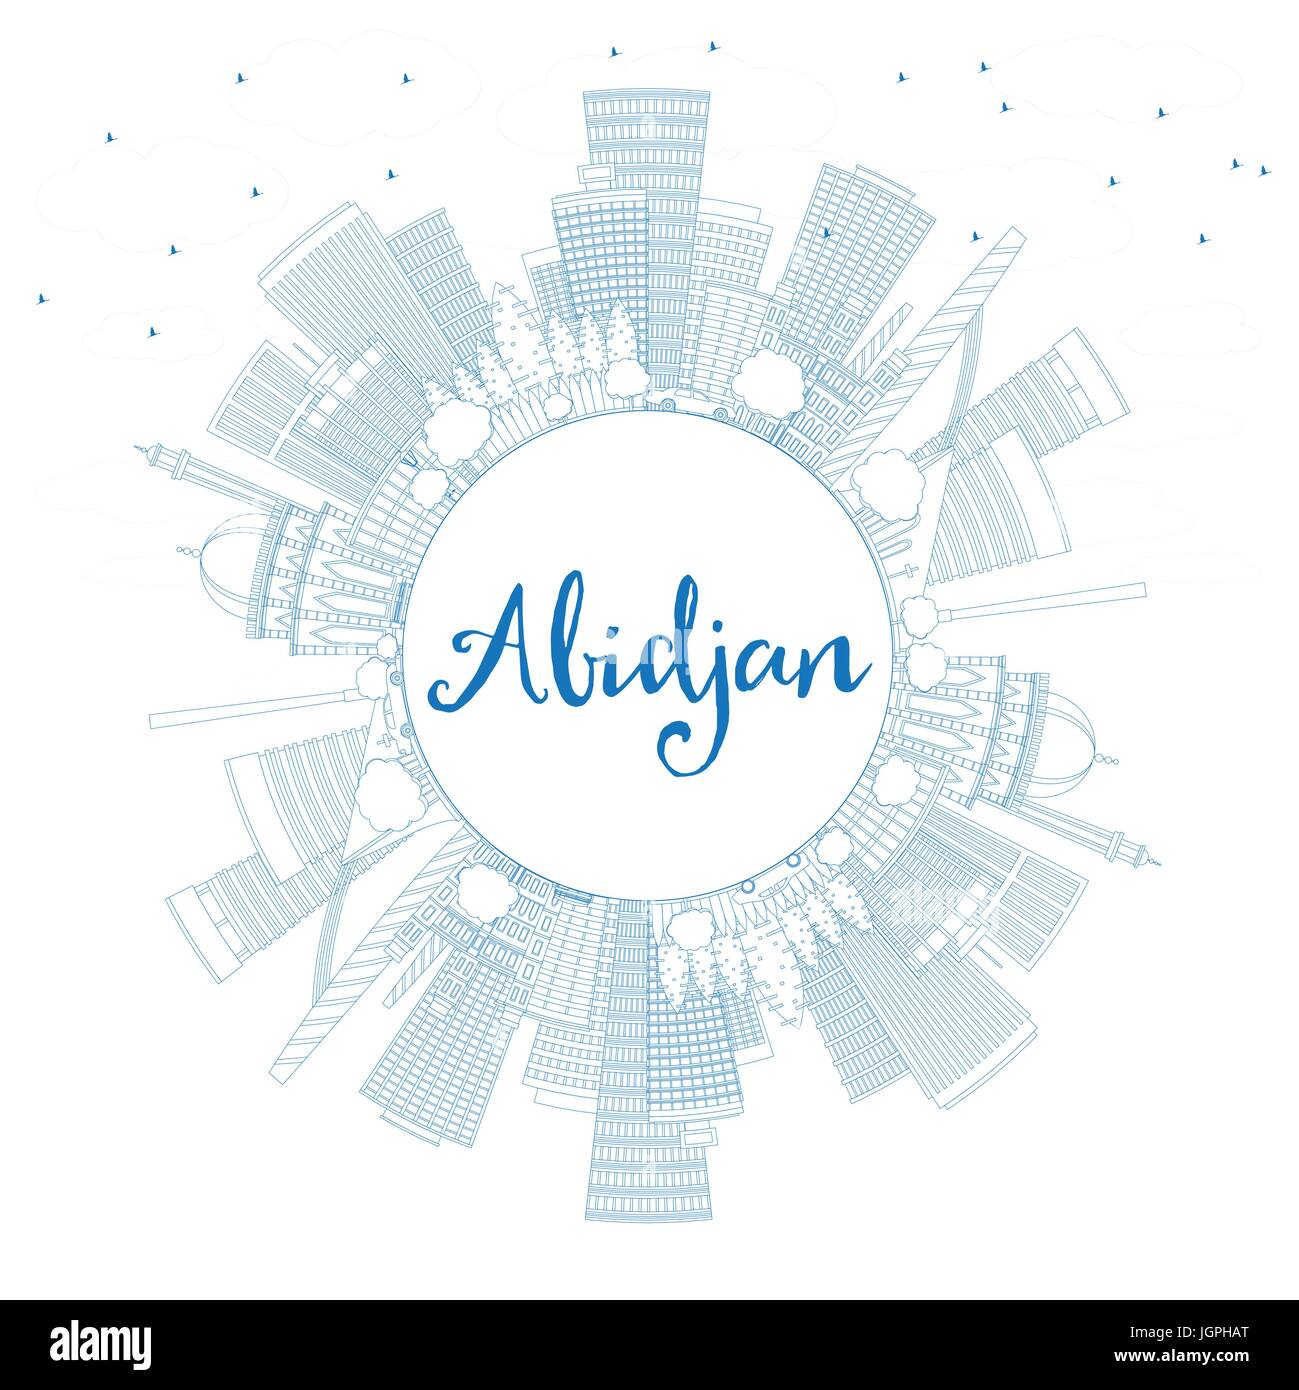 Outline Abidjan Skyline with Blue Buildings and Copy Space. Vector Illustration. Business Travel and Tourism Concept with Modern Architecture. Stock Vector